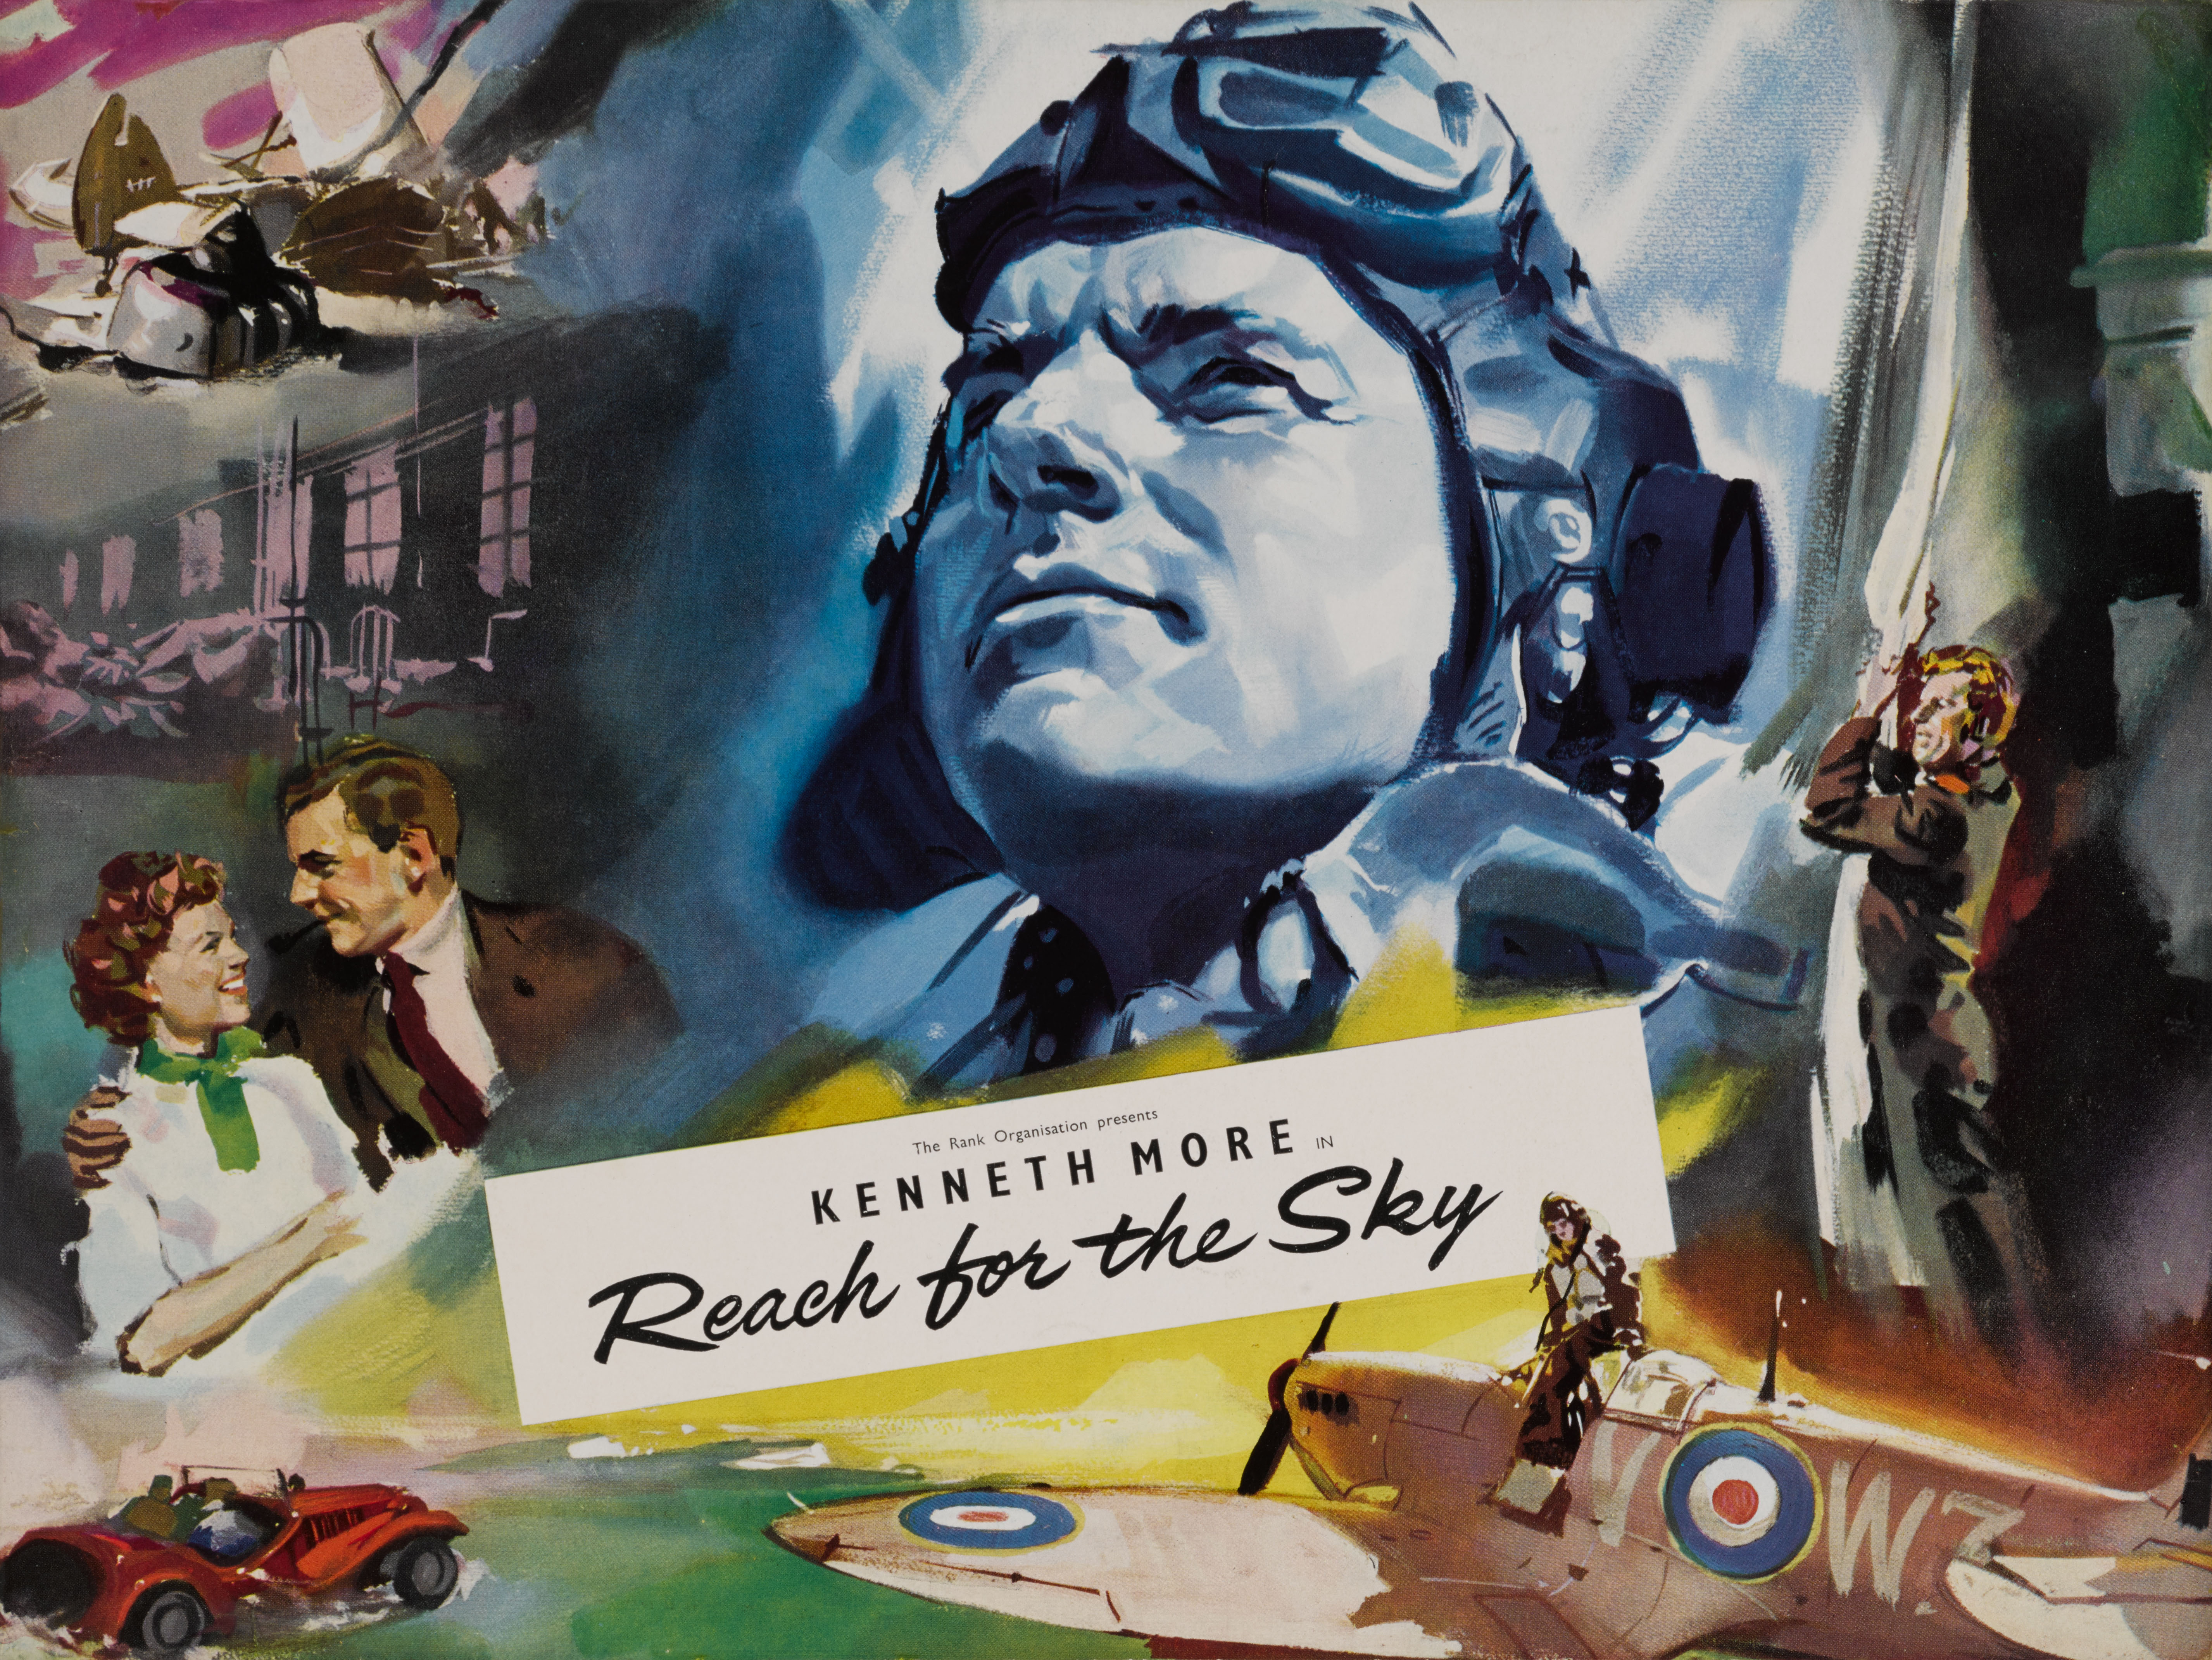 Reach for the Sky (1956) Original British synopses accompaniment  Artist: Dougie Post (dates unknown